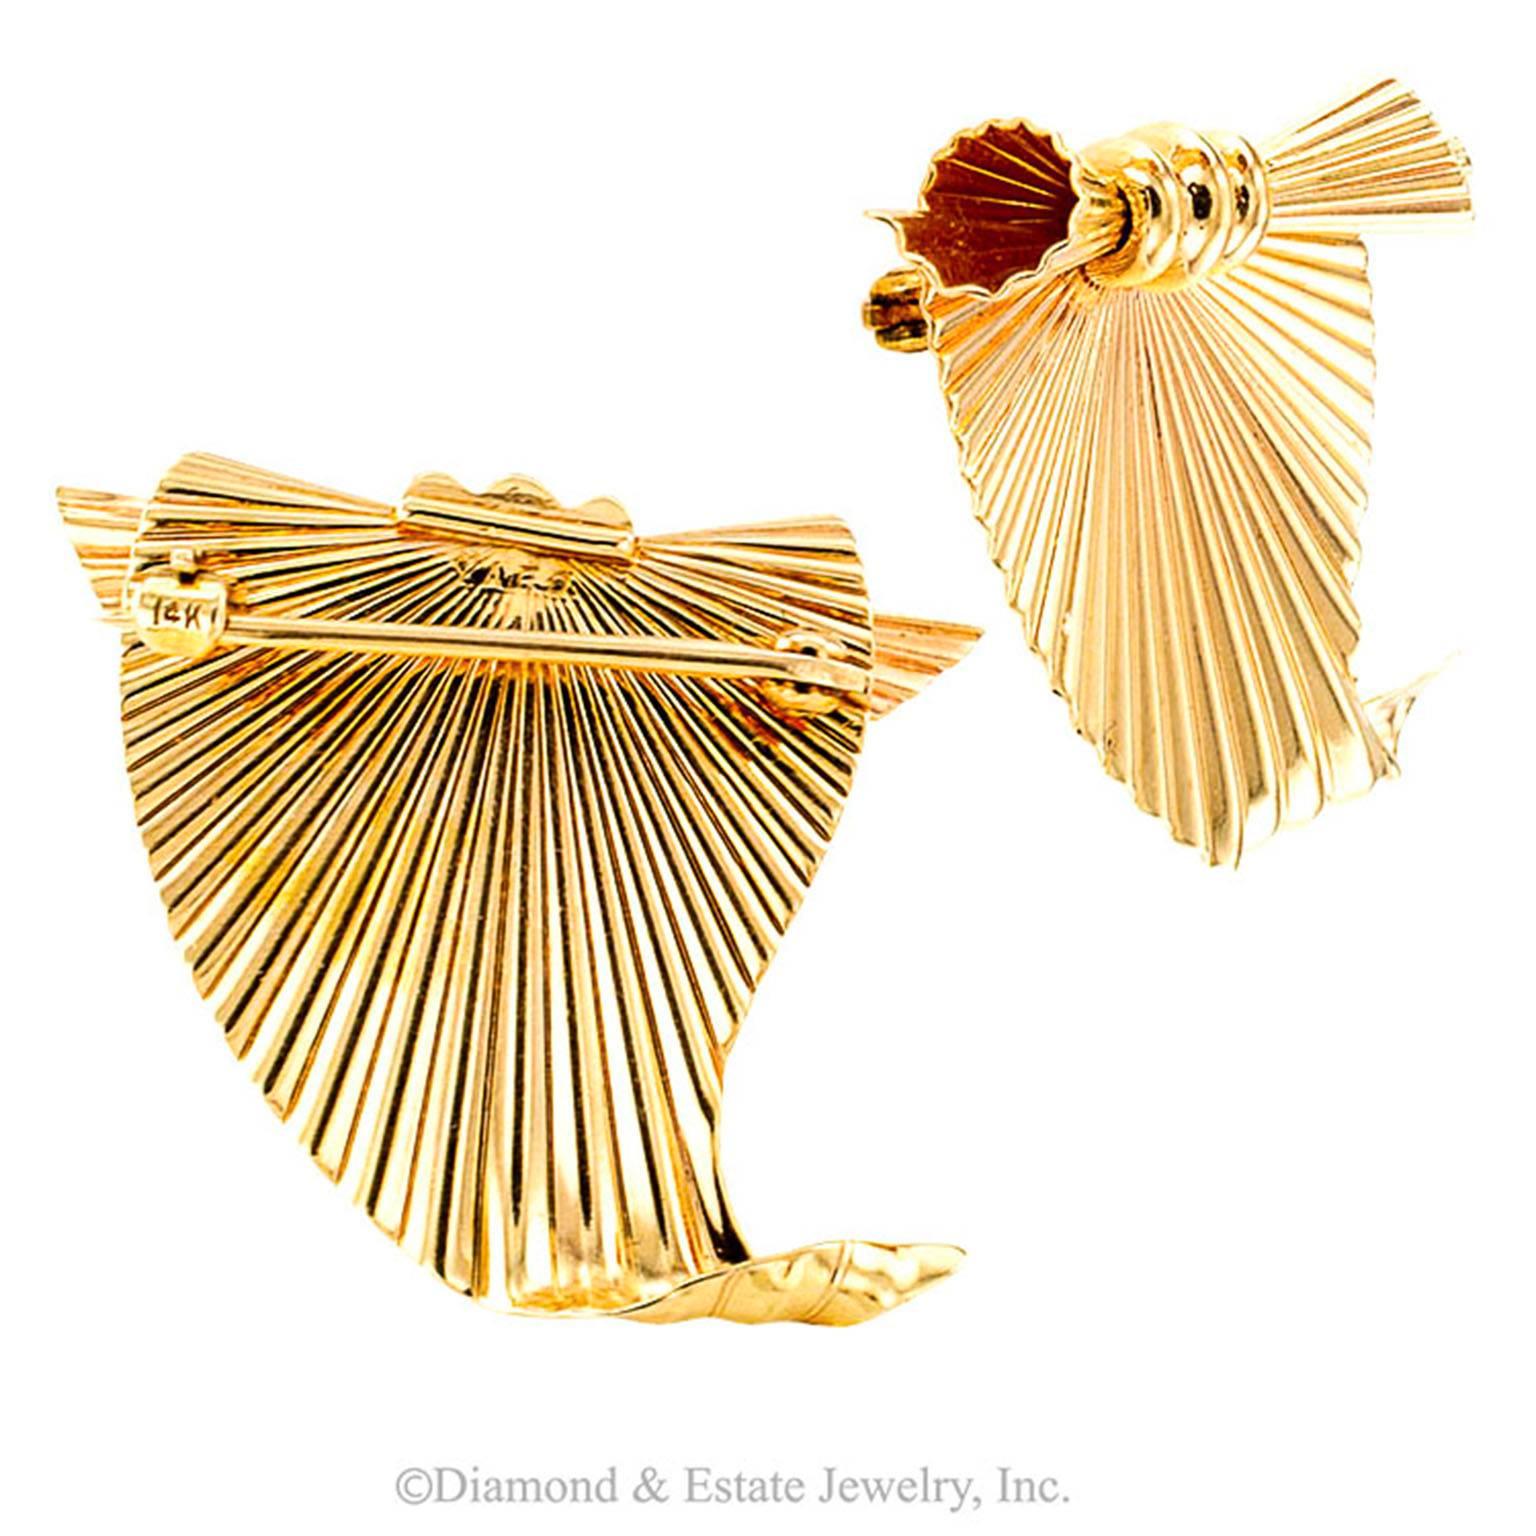 Raymond Yard Estate Retro Pair of Brooches Circa 1940

Like unfurling sails in the breeze, the hand fabricated designs feature radiating pleats of gold, ablaze with the unmistakable glow of polished gold.  There is a great deal of dimensionality, 